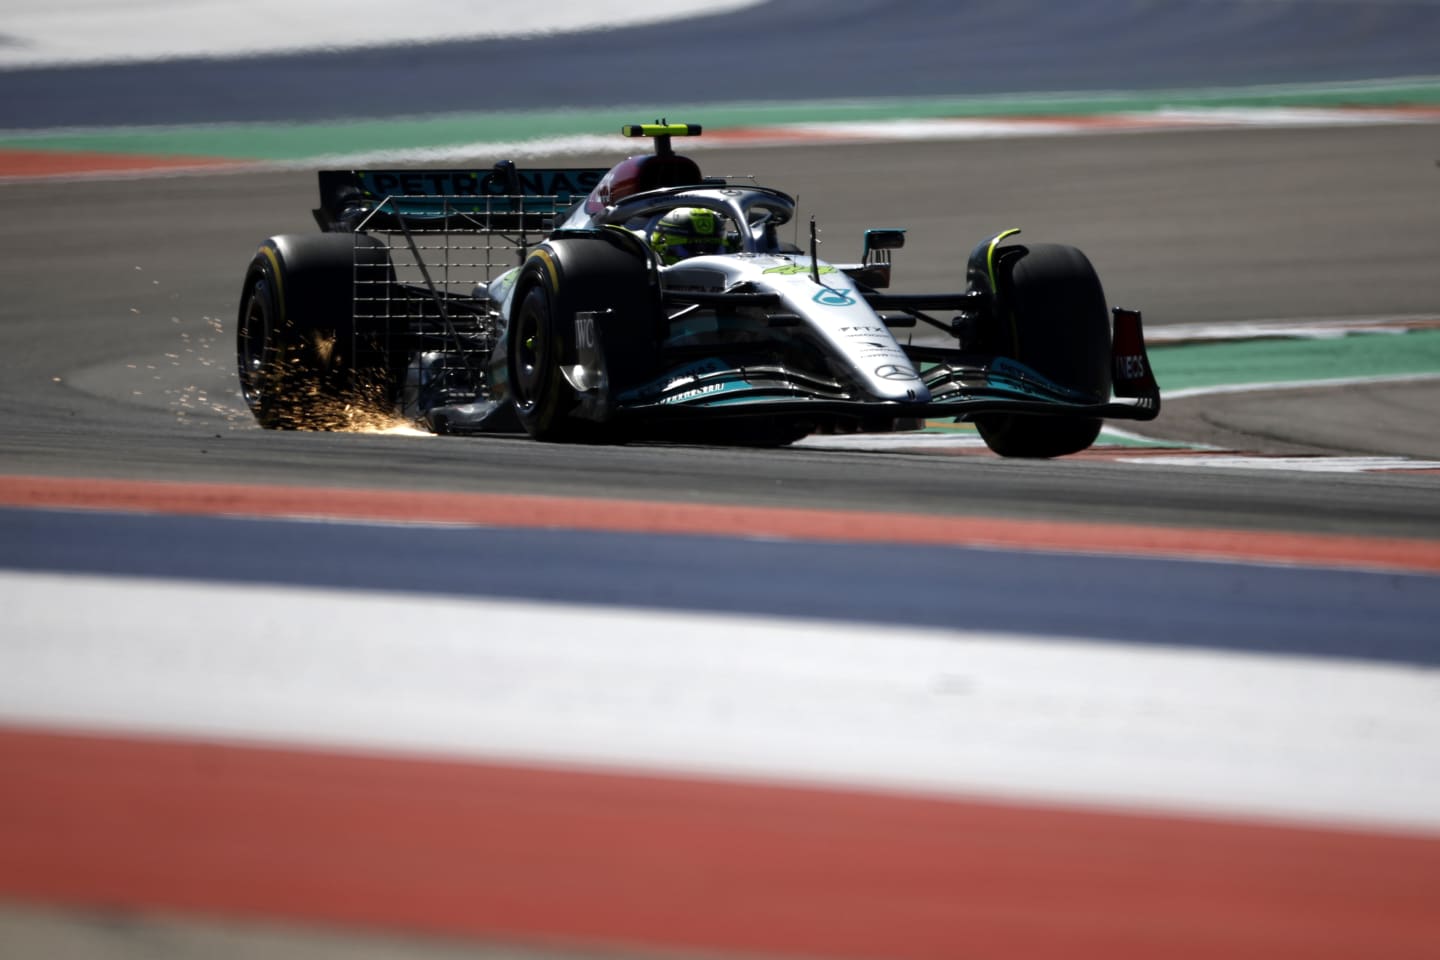 AUSTIN, TEXAS - OCTOBER 21: Lewis Hamilton of Great Britain driving the (44) Mercedes AMG Petronas F1 Team W13 on track during practice ahead of the F1 Grand Prix of USA at Circuit of The Americas on October 21, 2022 in Austin, Texas. (Photo by Jared C. Tilton/Getty Images)